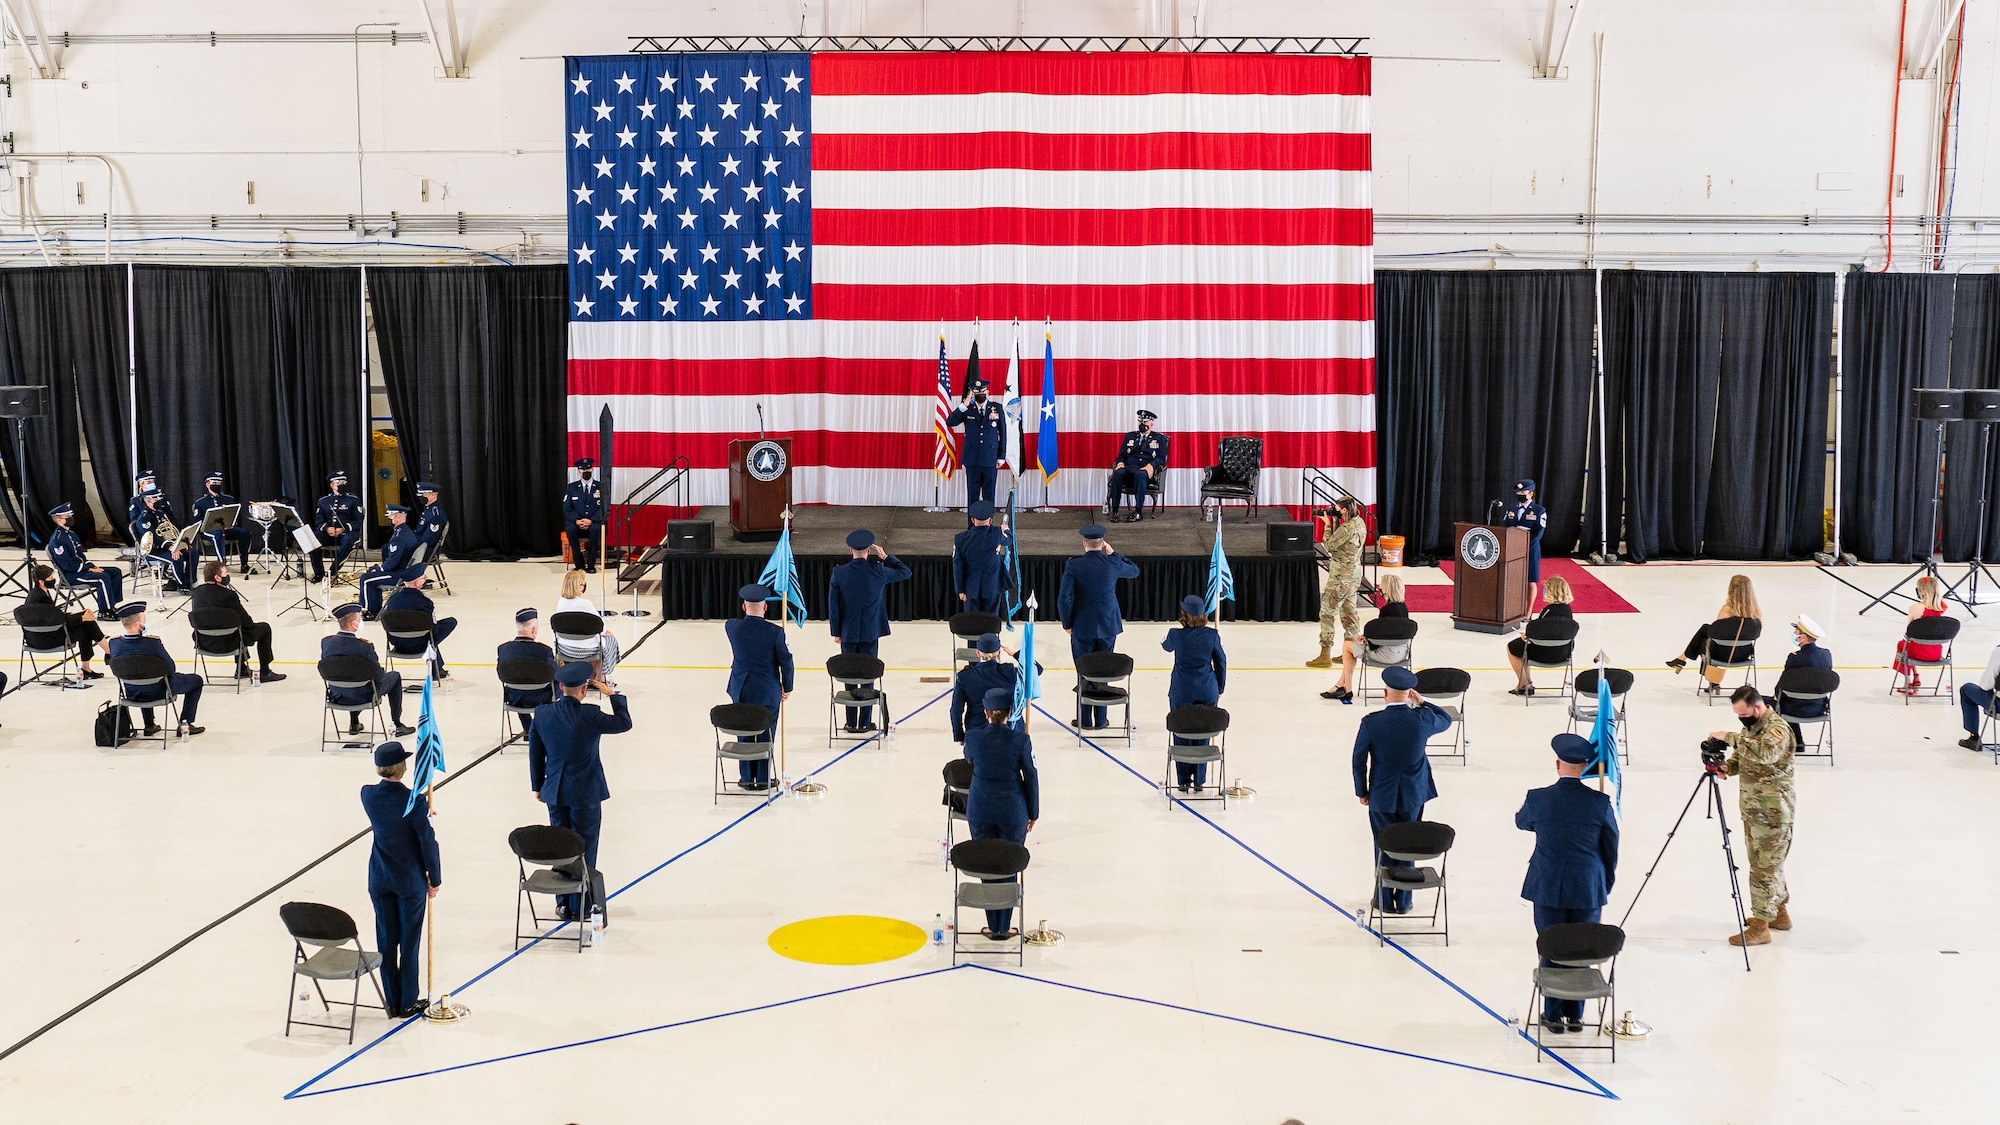 Guardians render an initial salute to Brig Gen. Shawn N. Bratton after he assumed command of the U.S. Space Force, Space Training and Readiness Command, in a ceremony at Peterson Air Force Base, CO, on August 23, 2021.(Courtesy Photo)